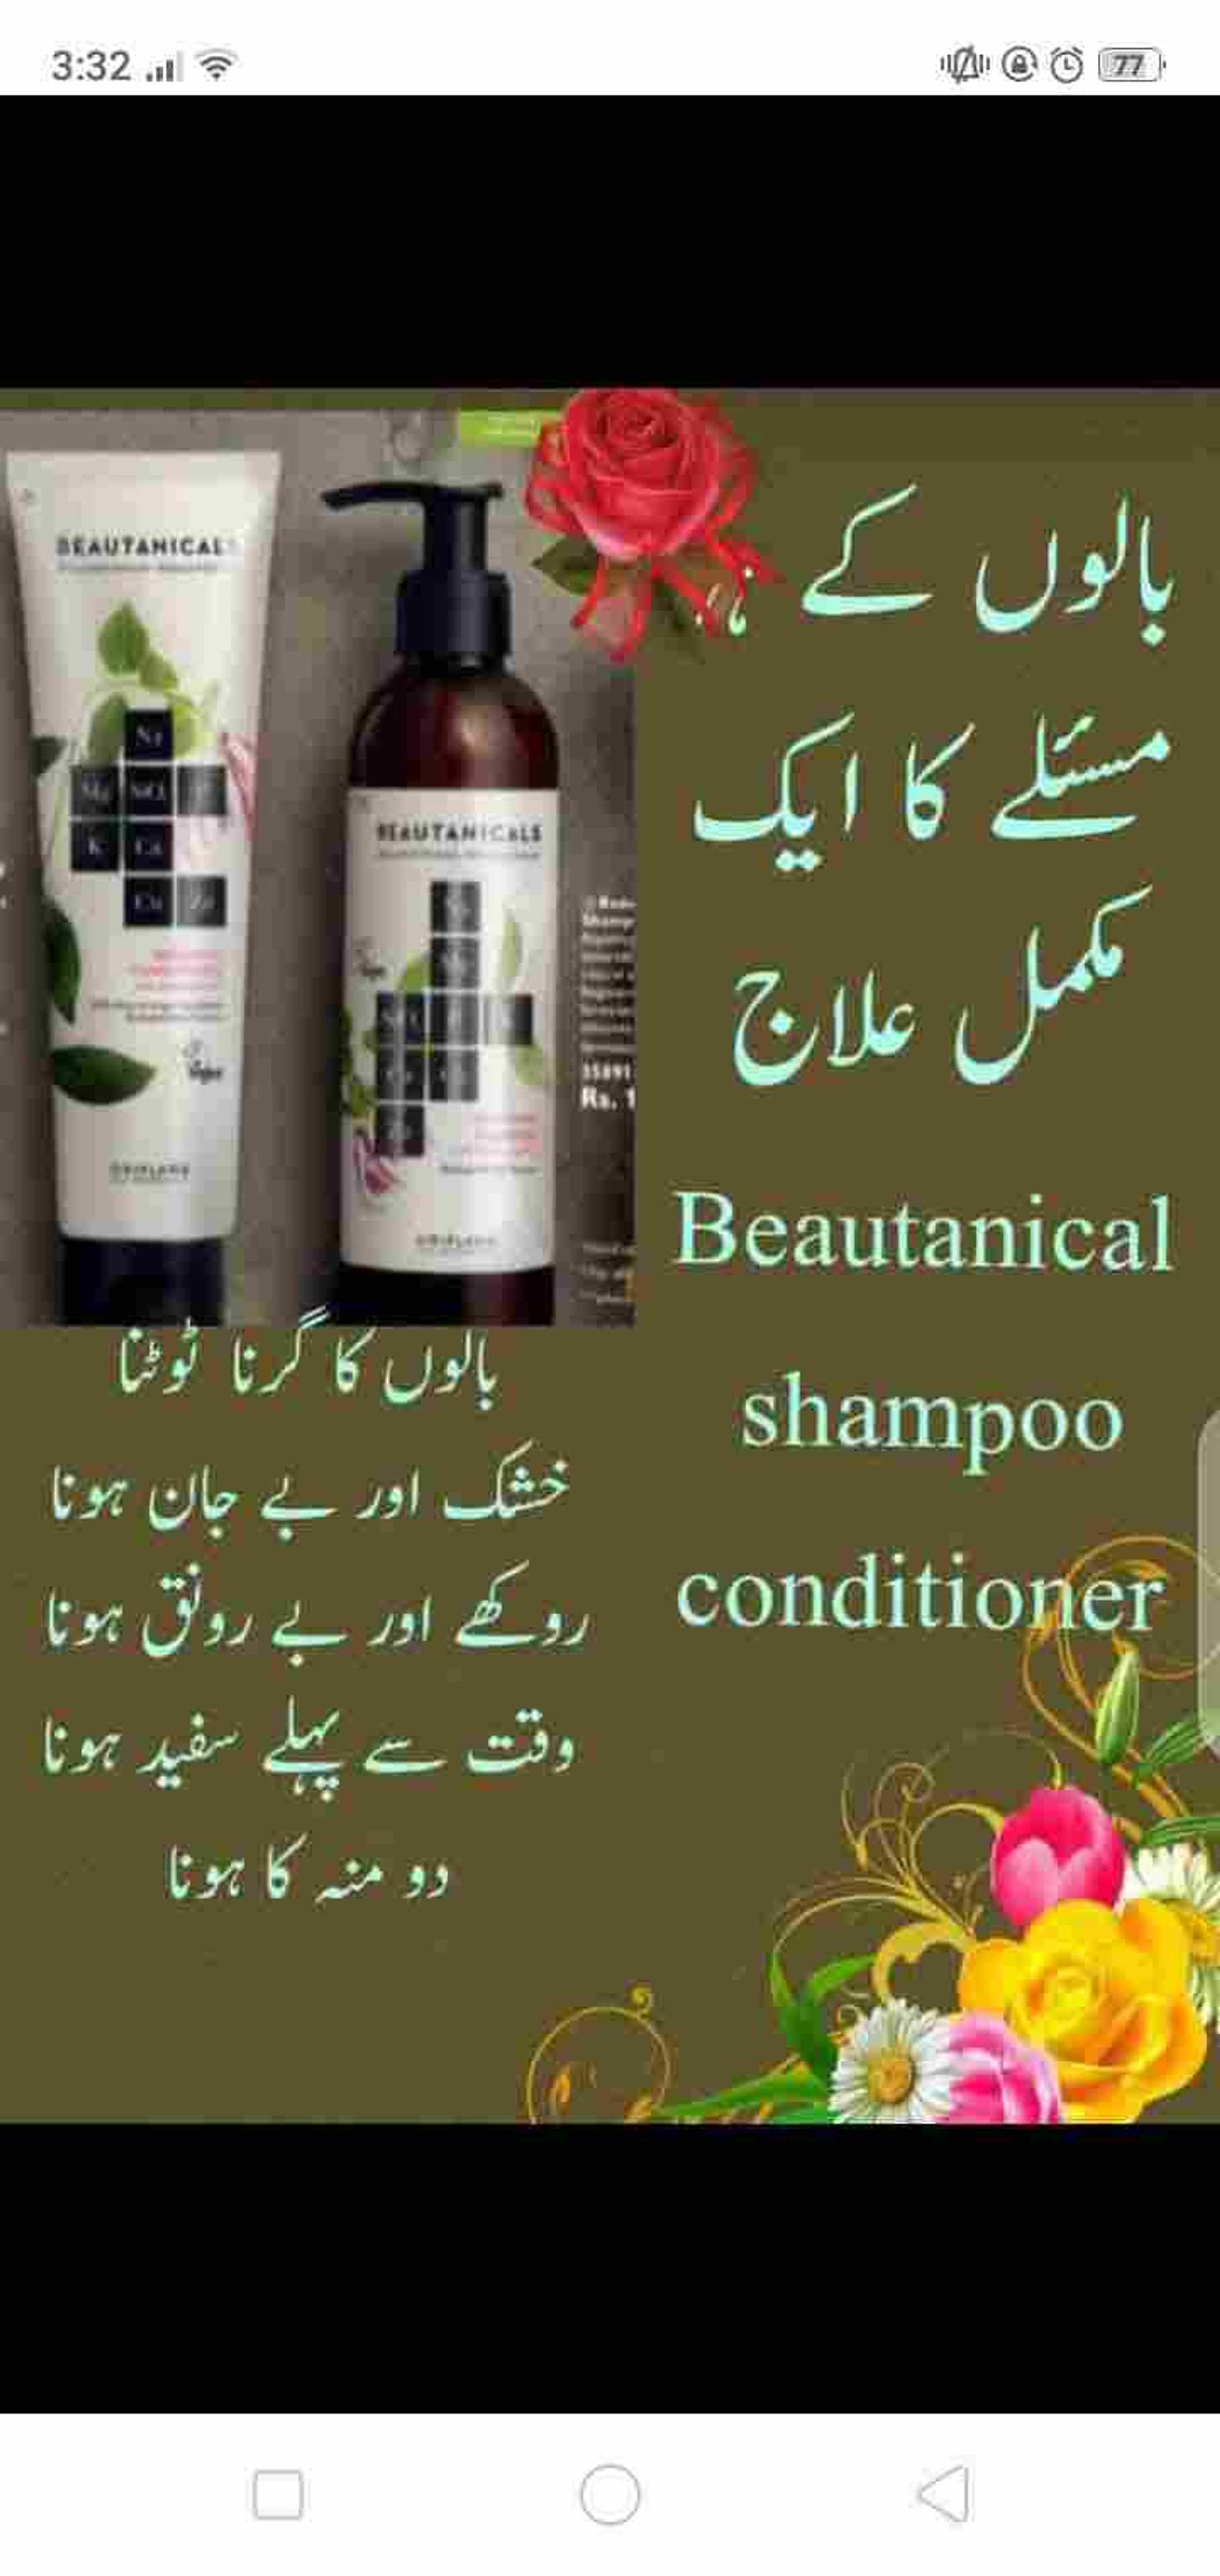 Beautanical shampoo and conditioner